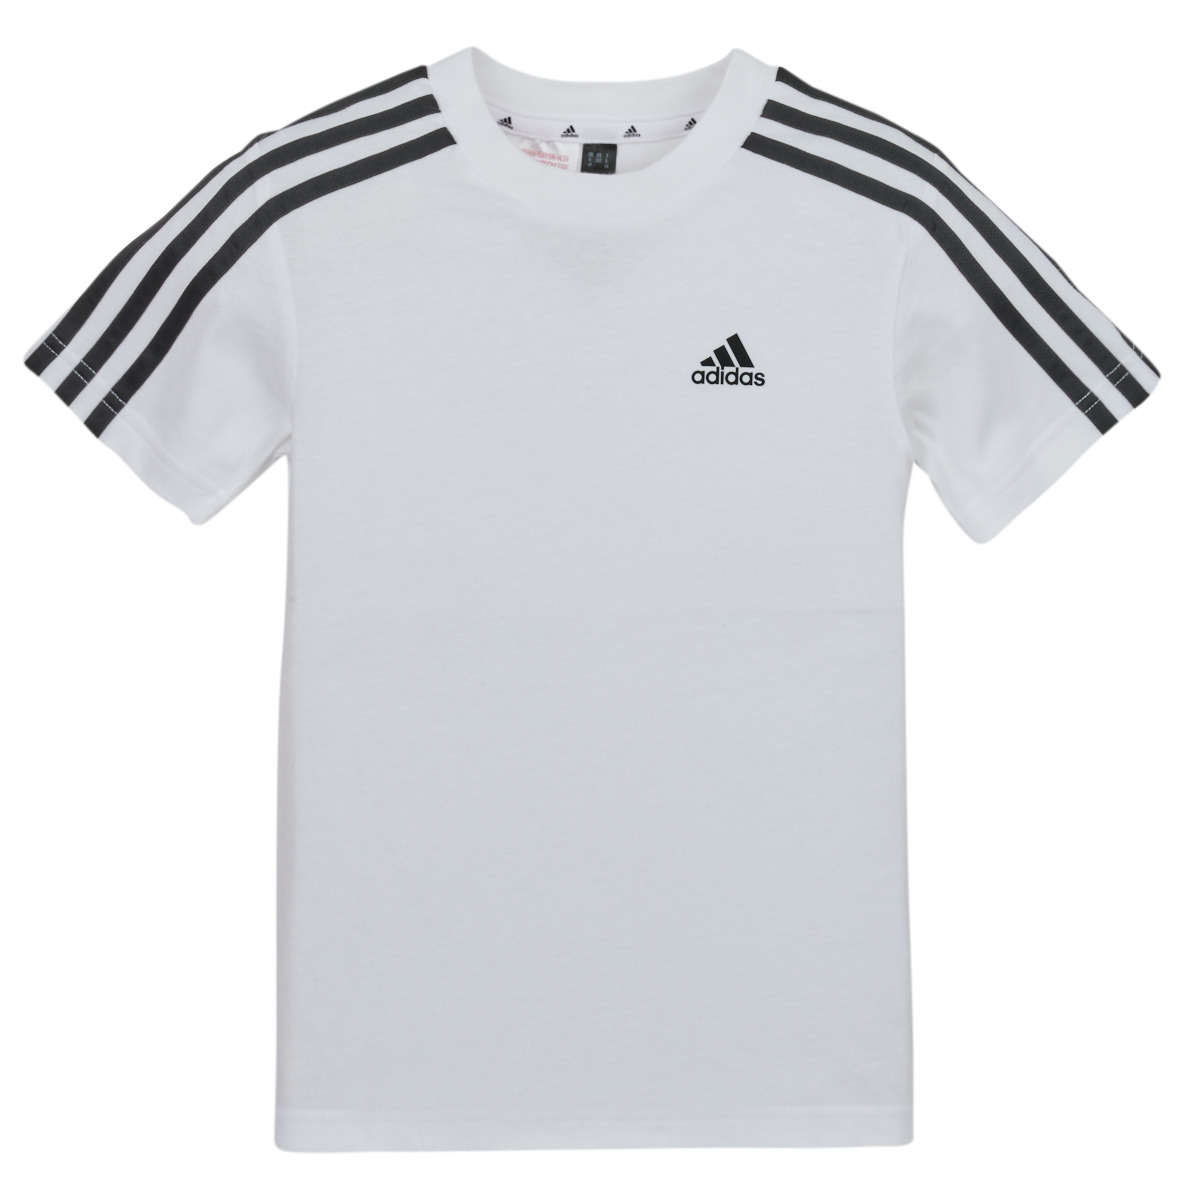 £ LK CO TEE - Delivery Clothing Sportswear Adidas 3S Rubbersole.co.uk White with Short-sleeved ! Child Free - t-shirts